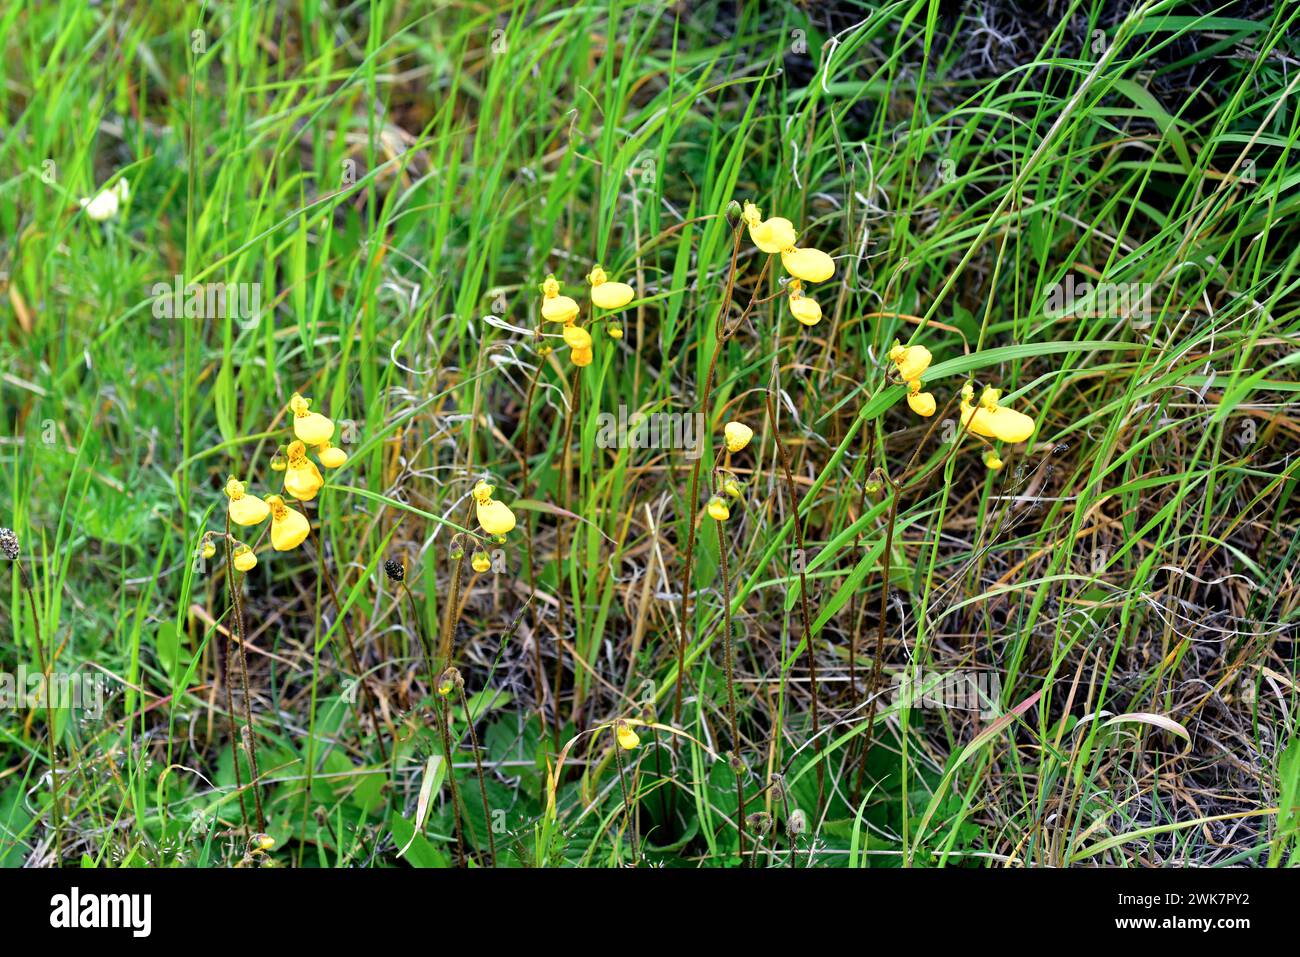 Pocketbook flower or zapatitos de Venus (Calceolaria biflora) is a perennial herb endemic to Argentina and Chile. This photo was taken in Torres del P Stock Photo